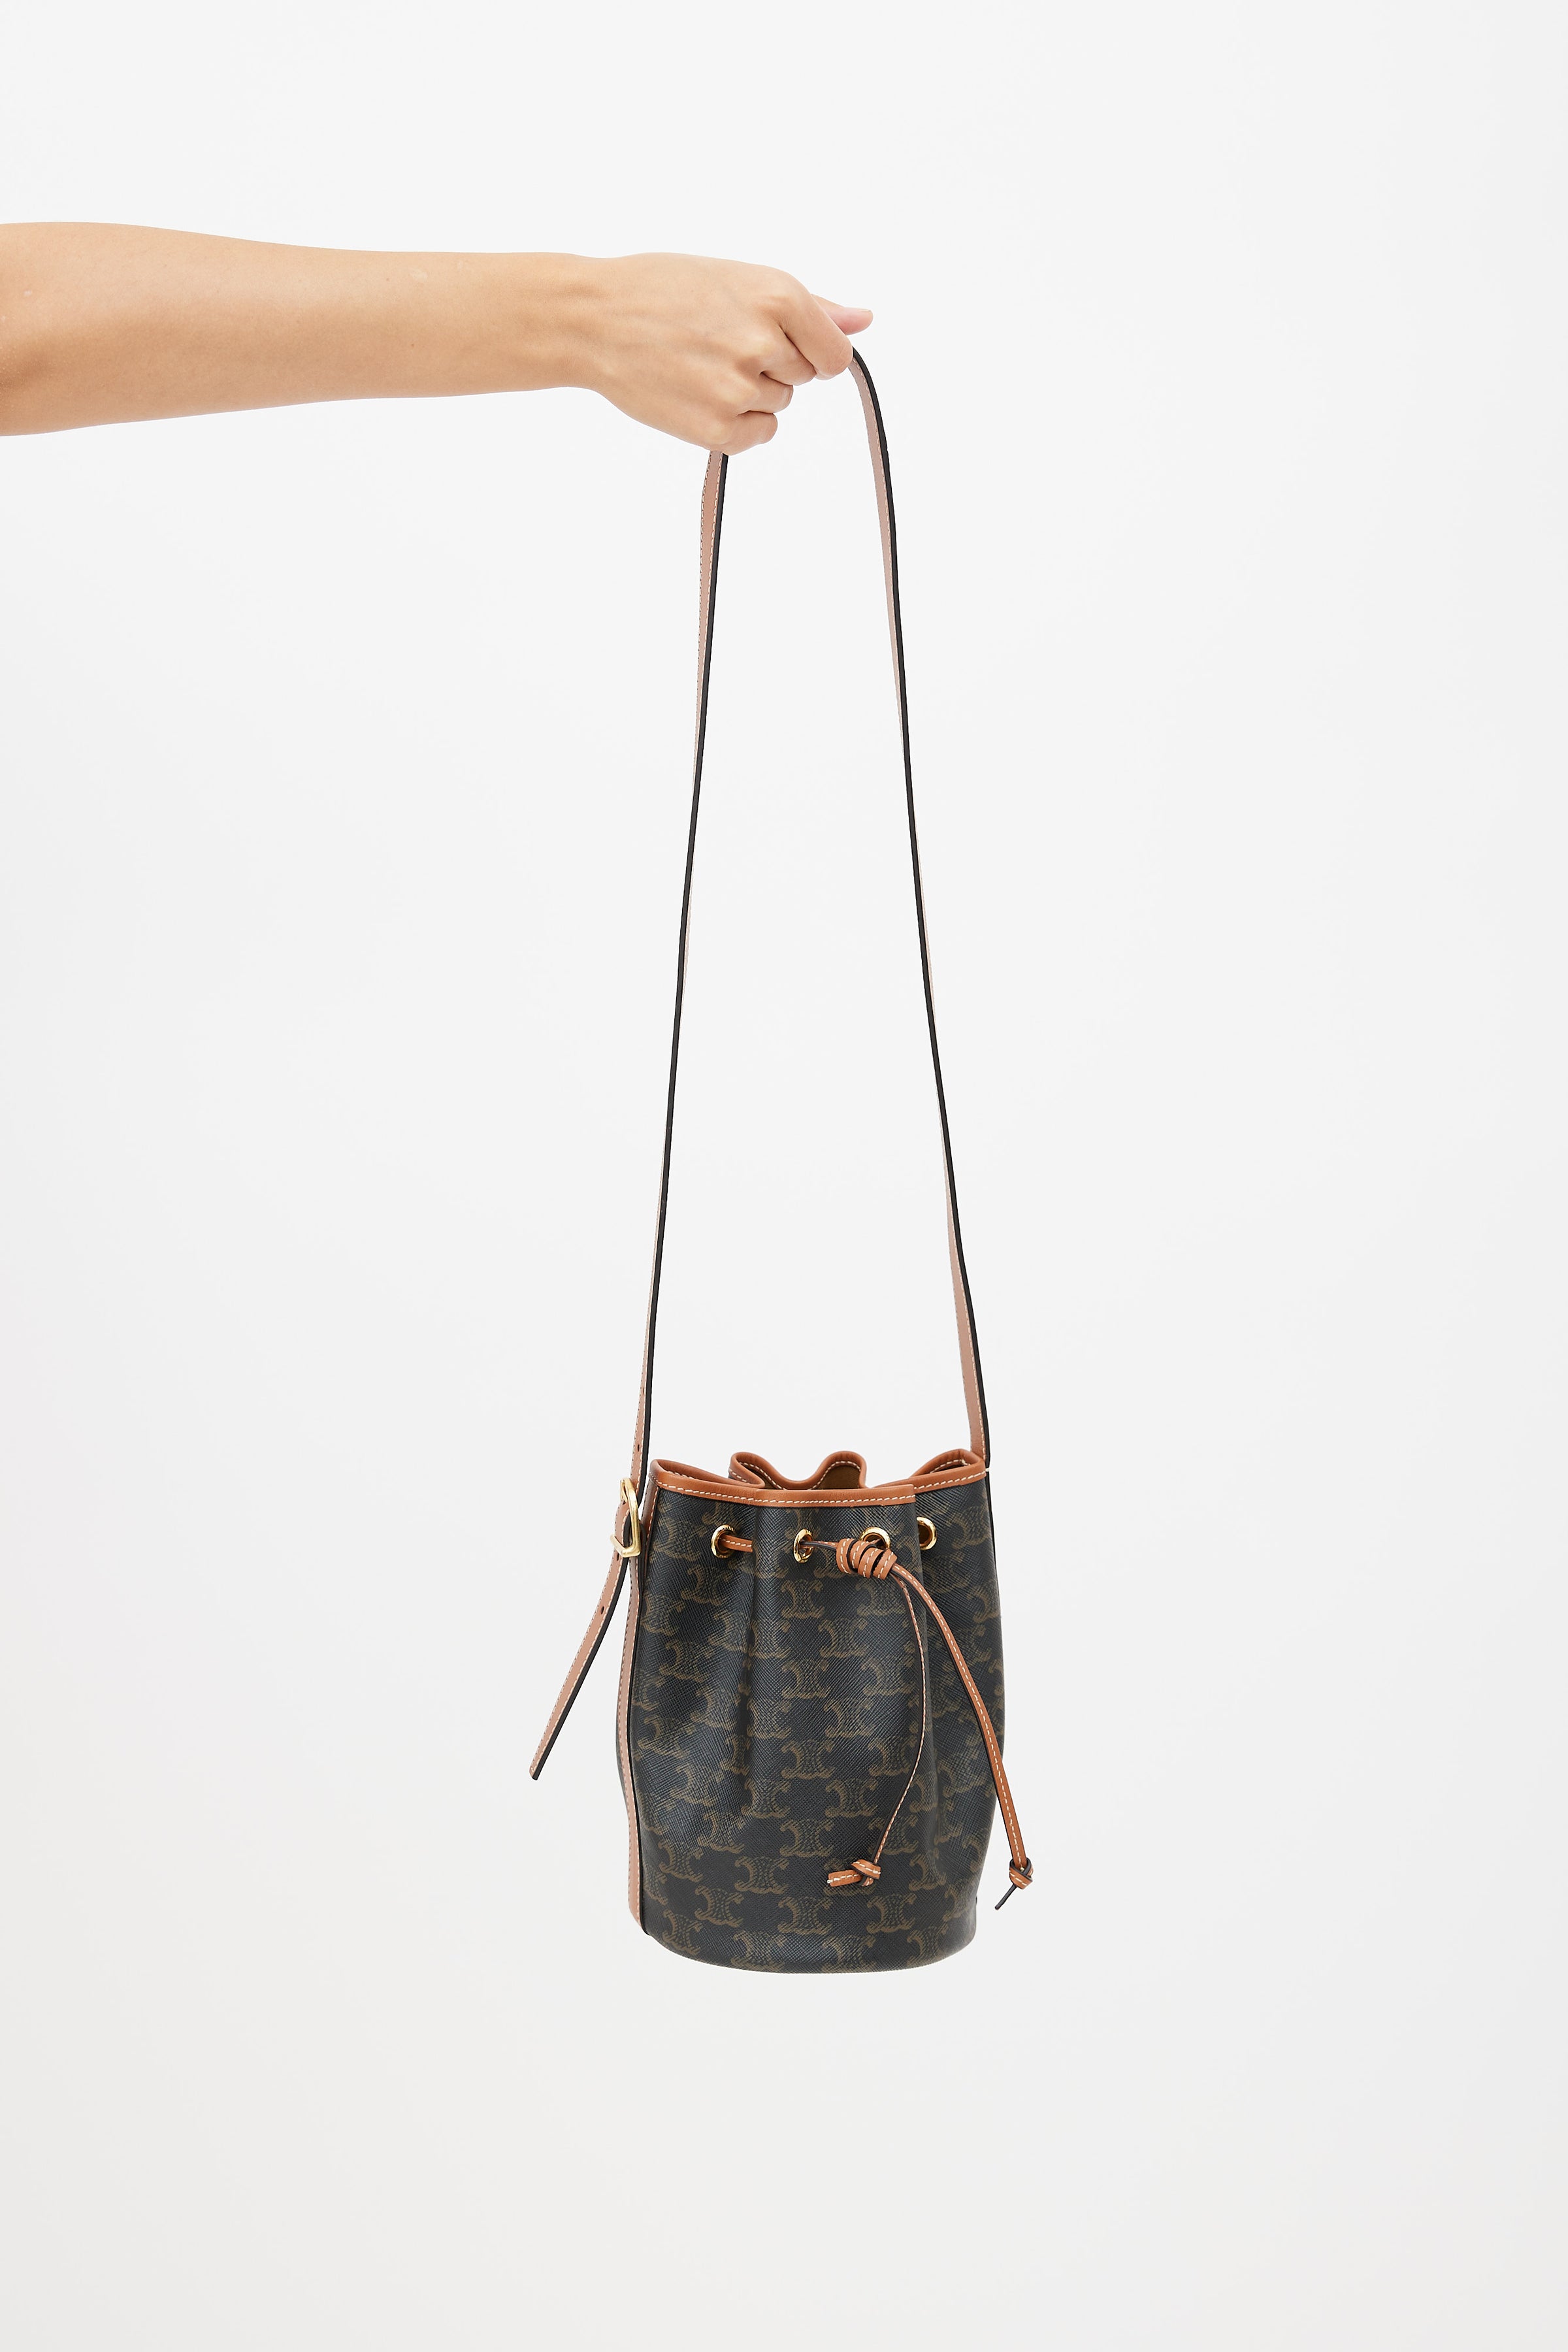 Celine Triomphe Small Canvas & Leather Bucket Bag in Brown